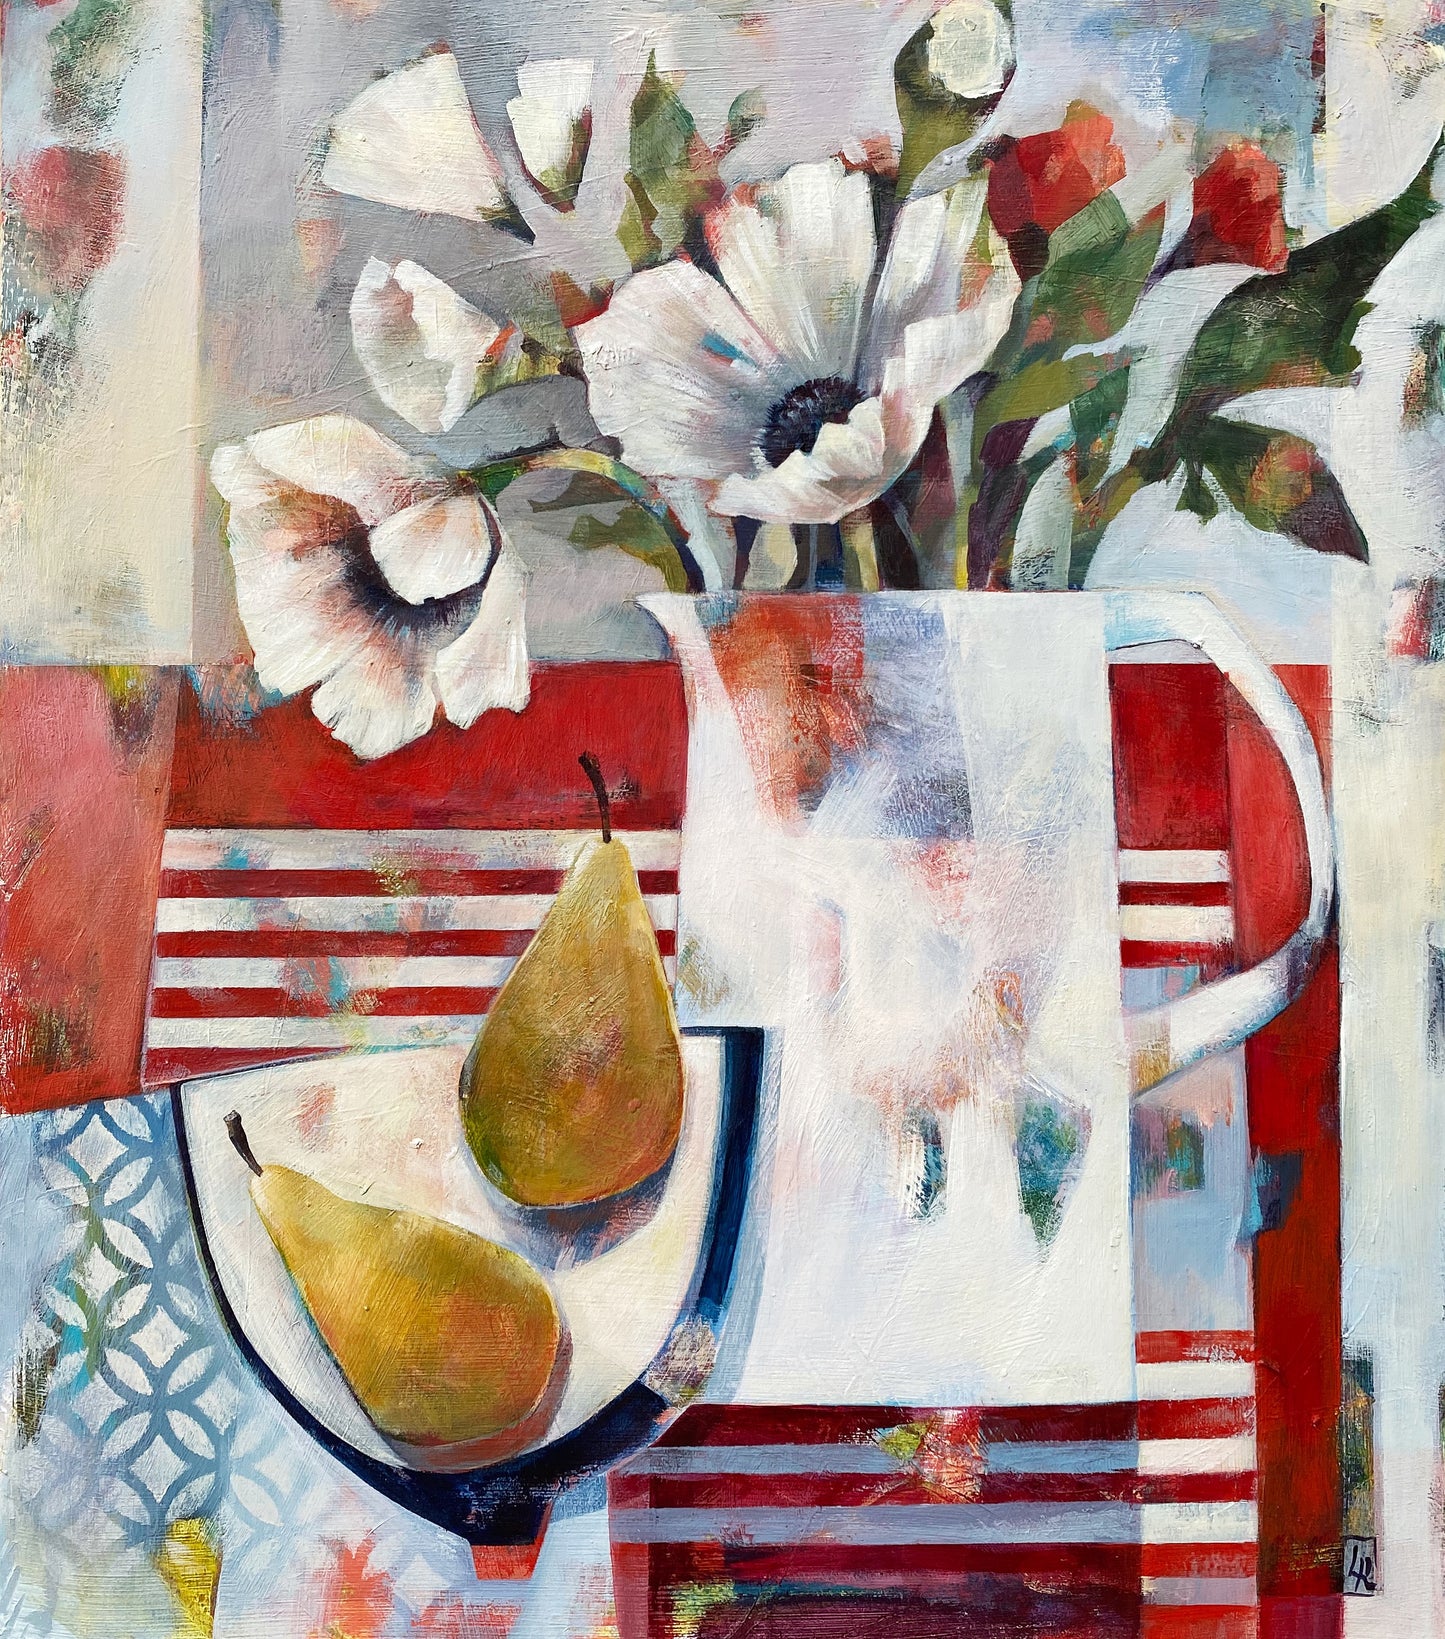 Poppies and Pears